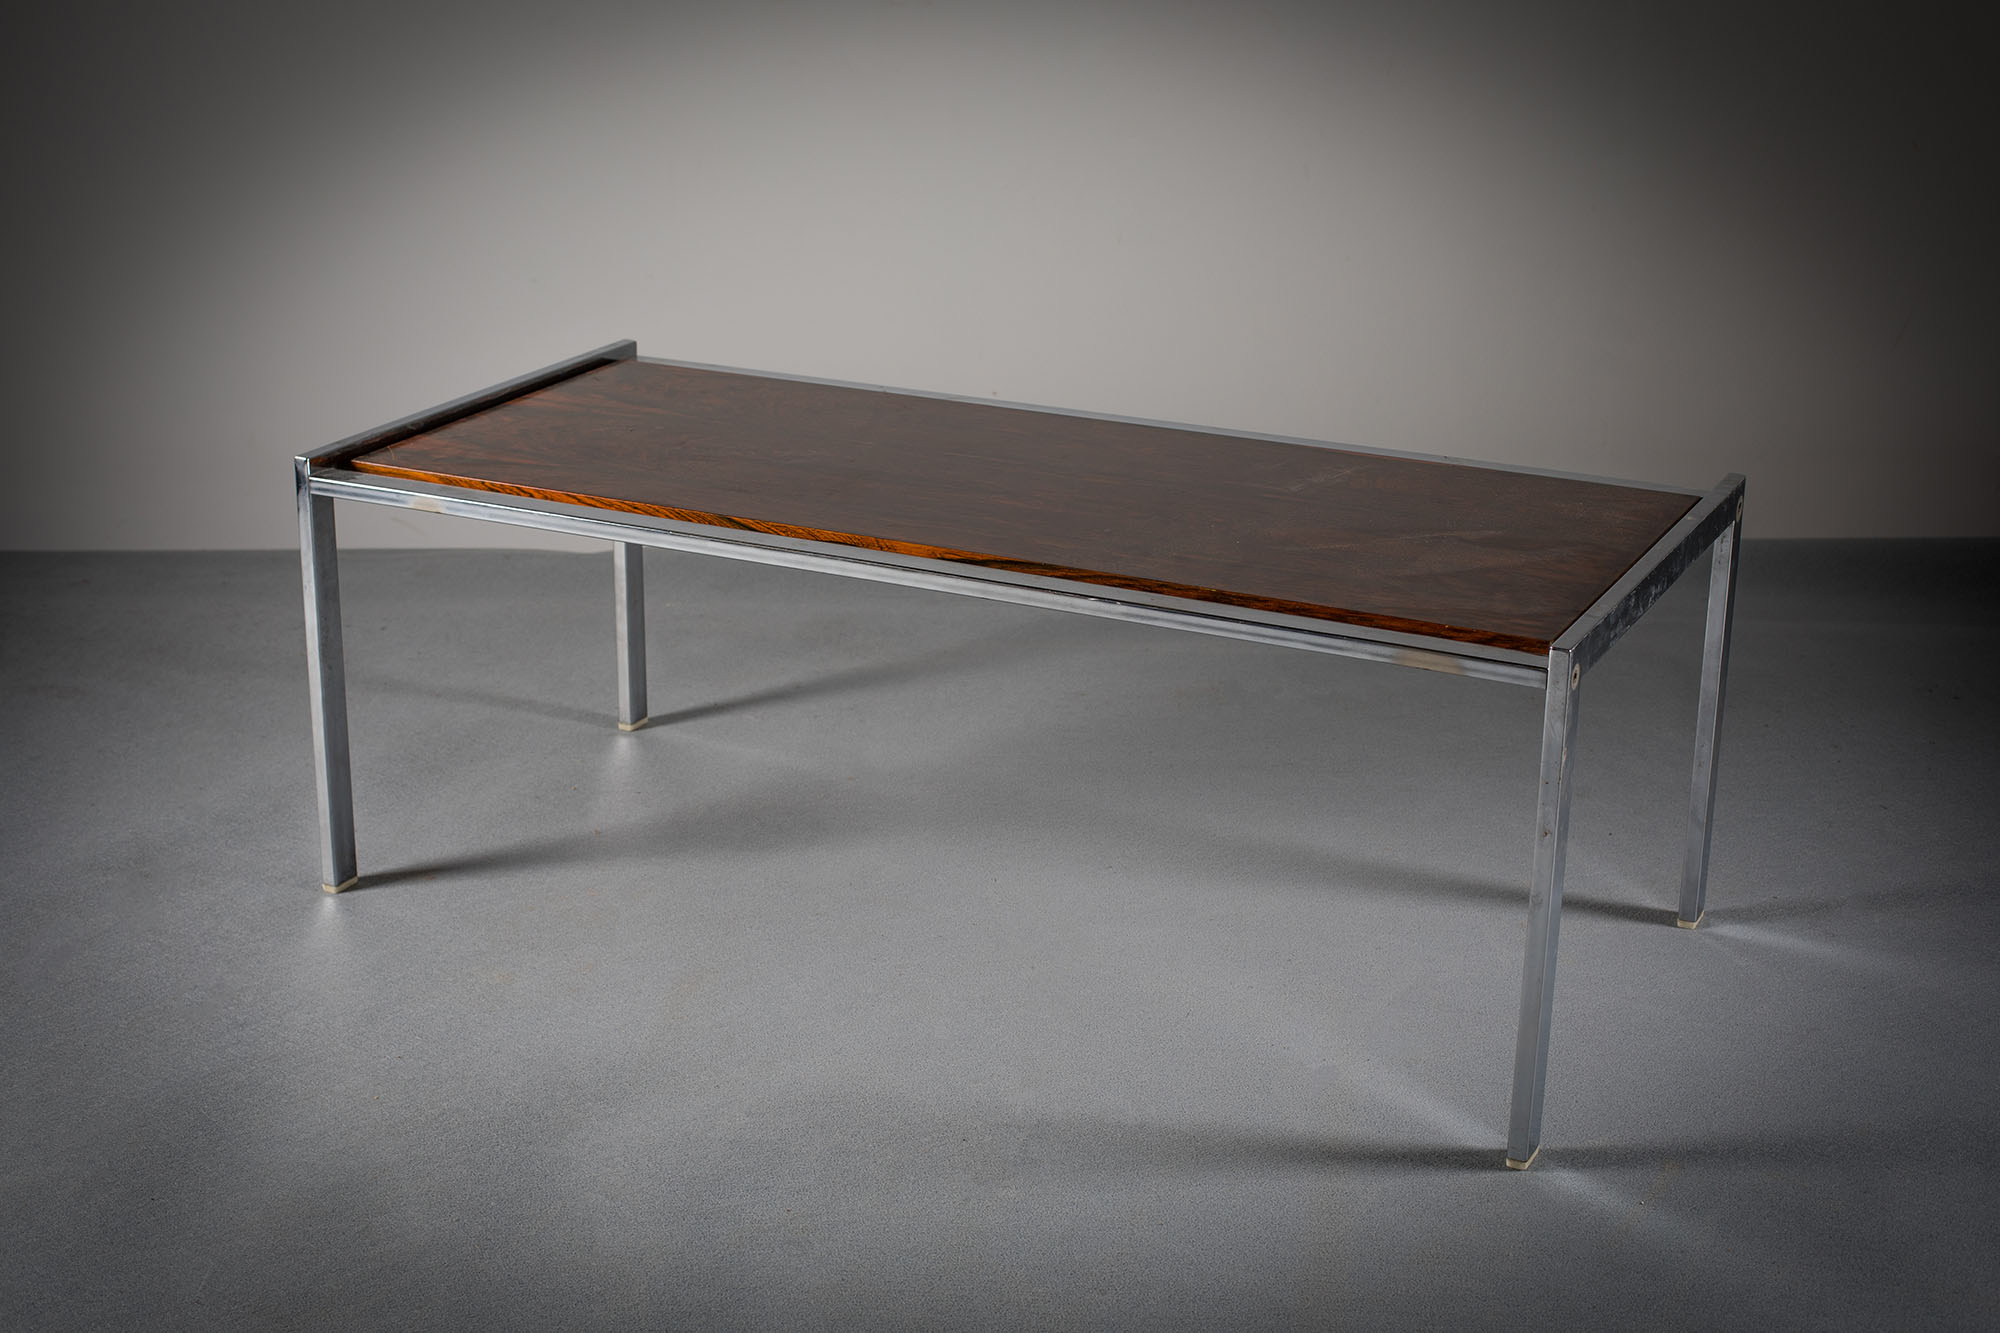 1970s LOW TABLE